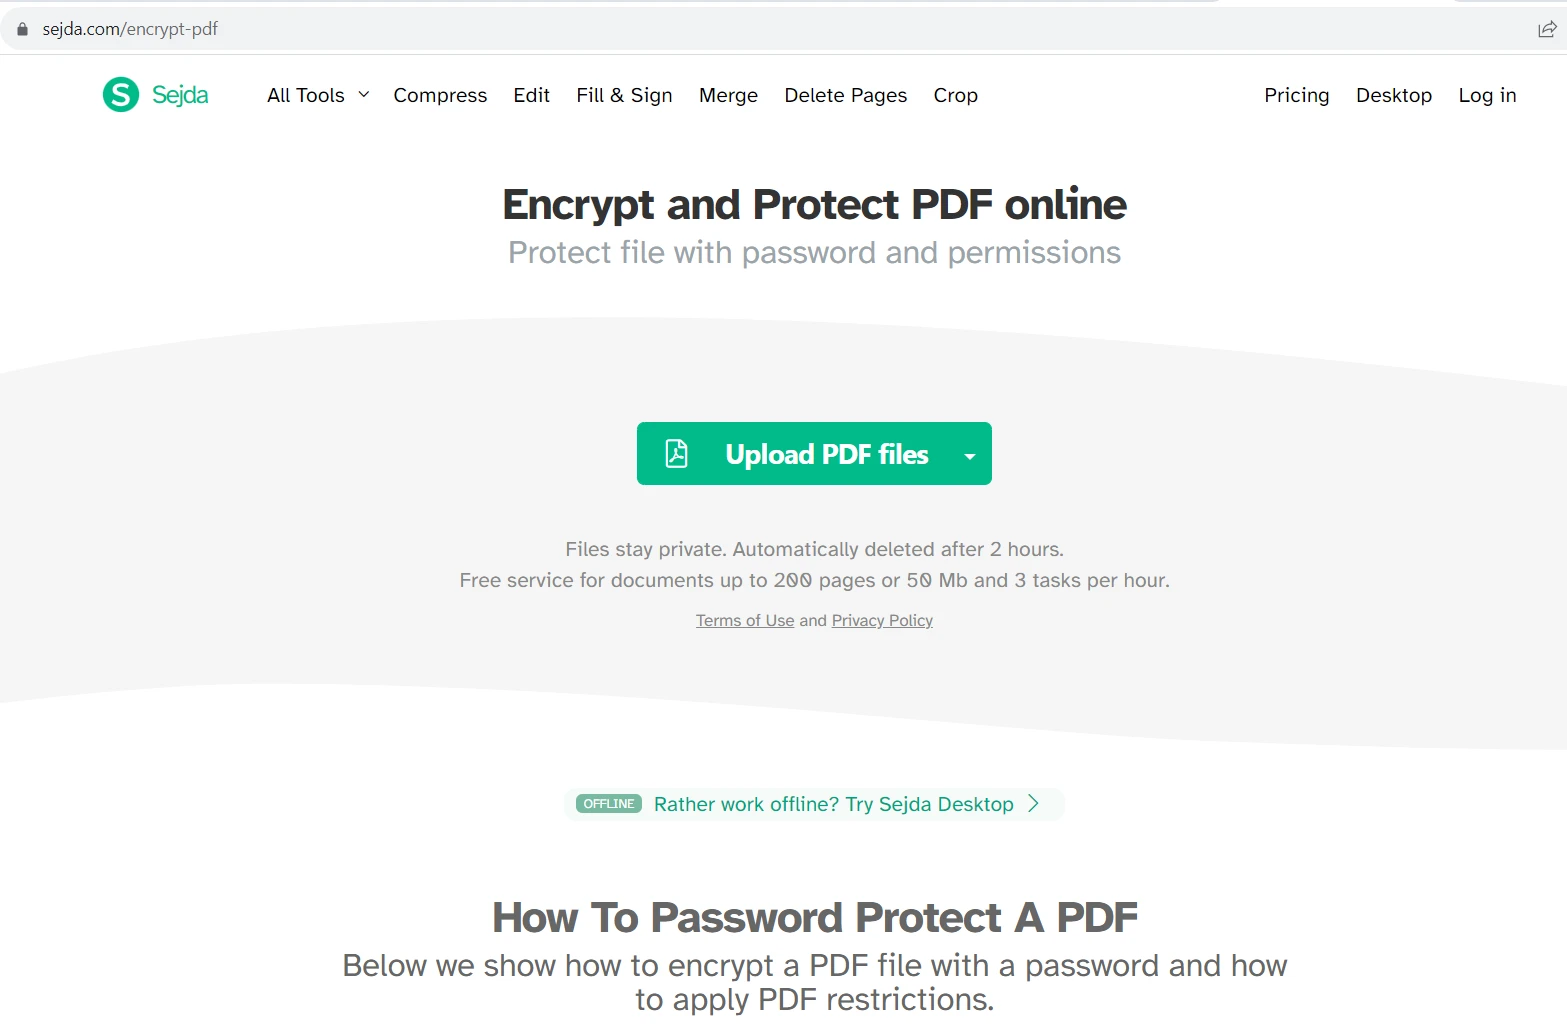 How to Password Protect a PDF for Free: Figure 2